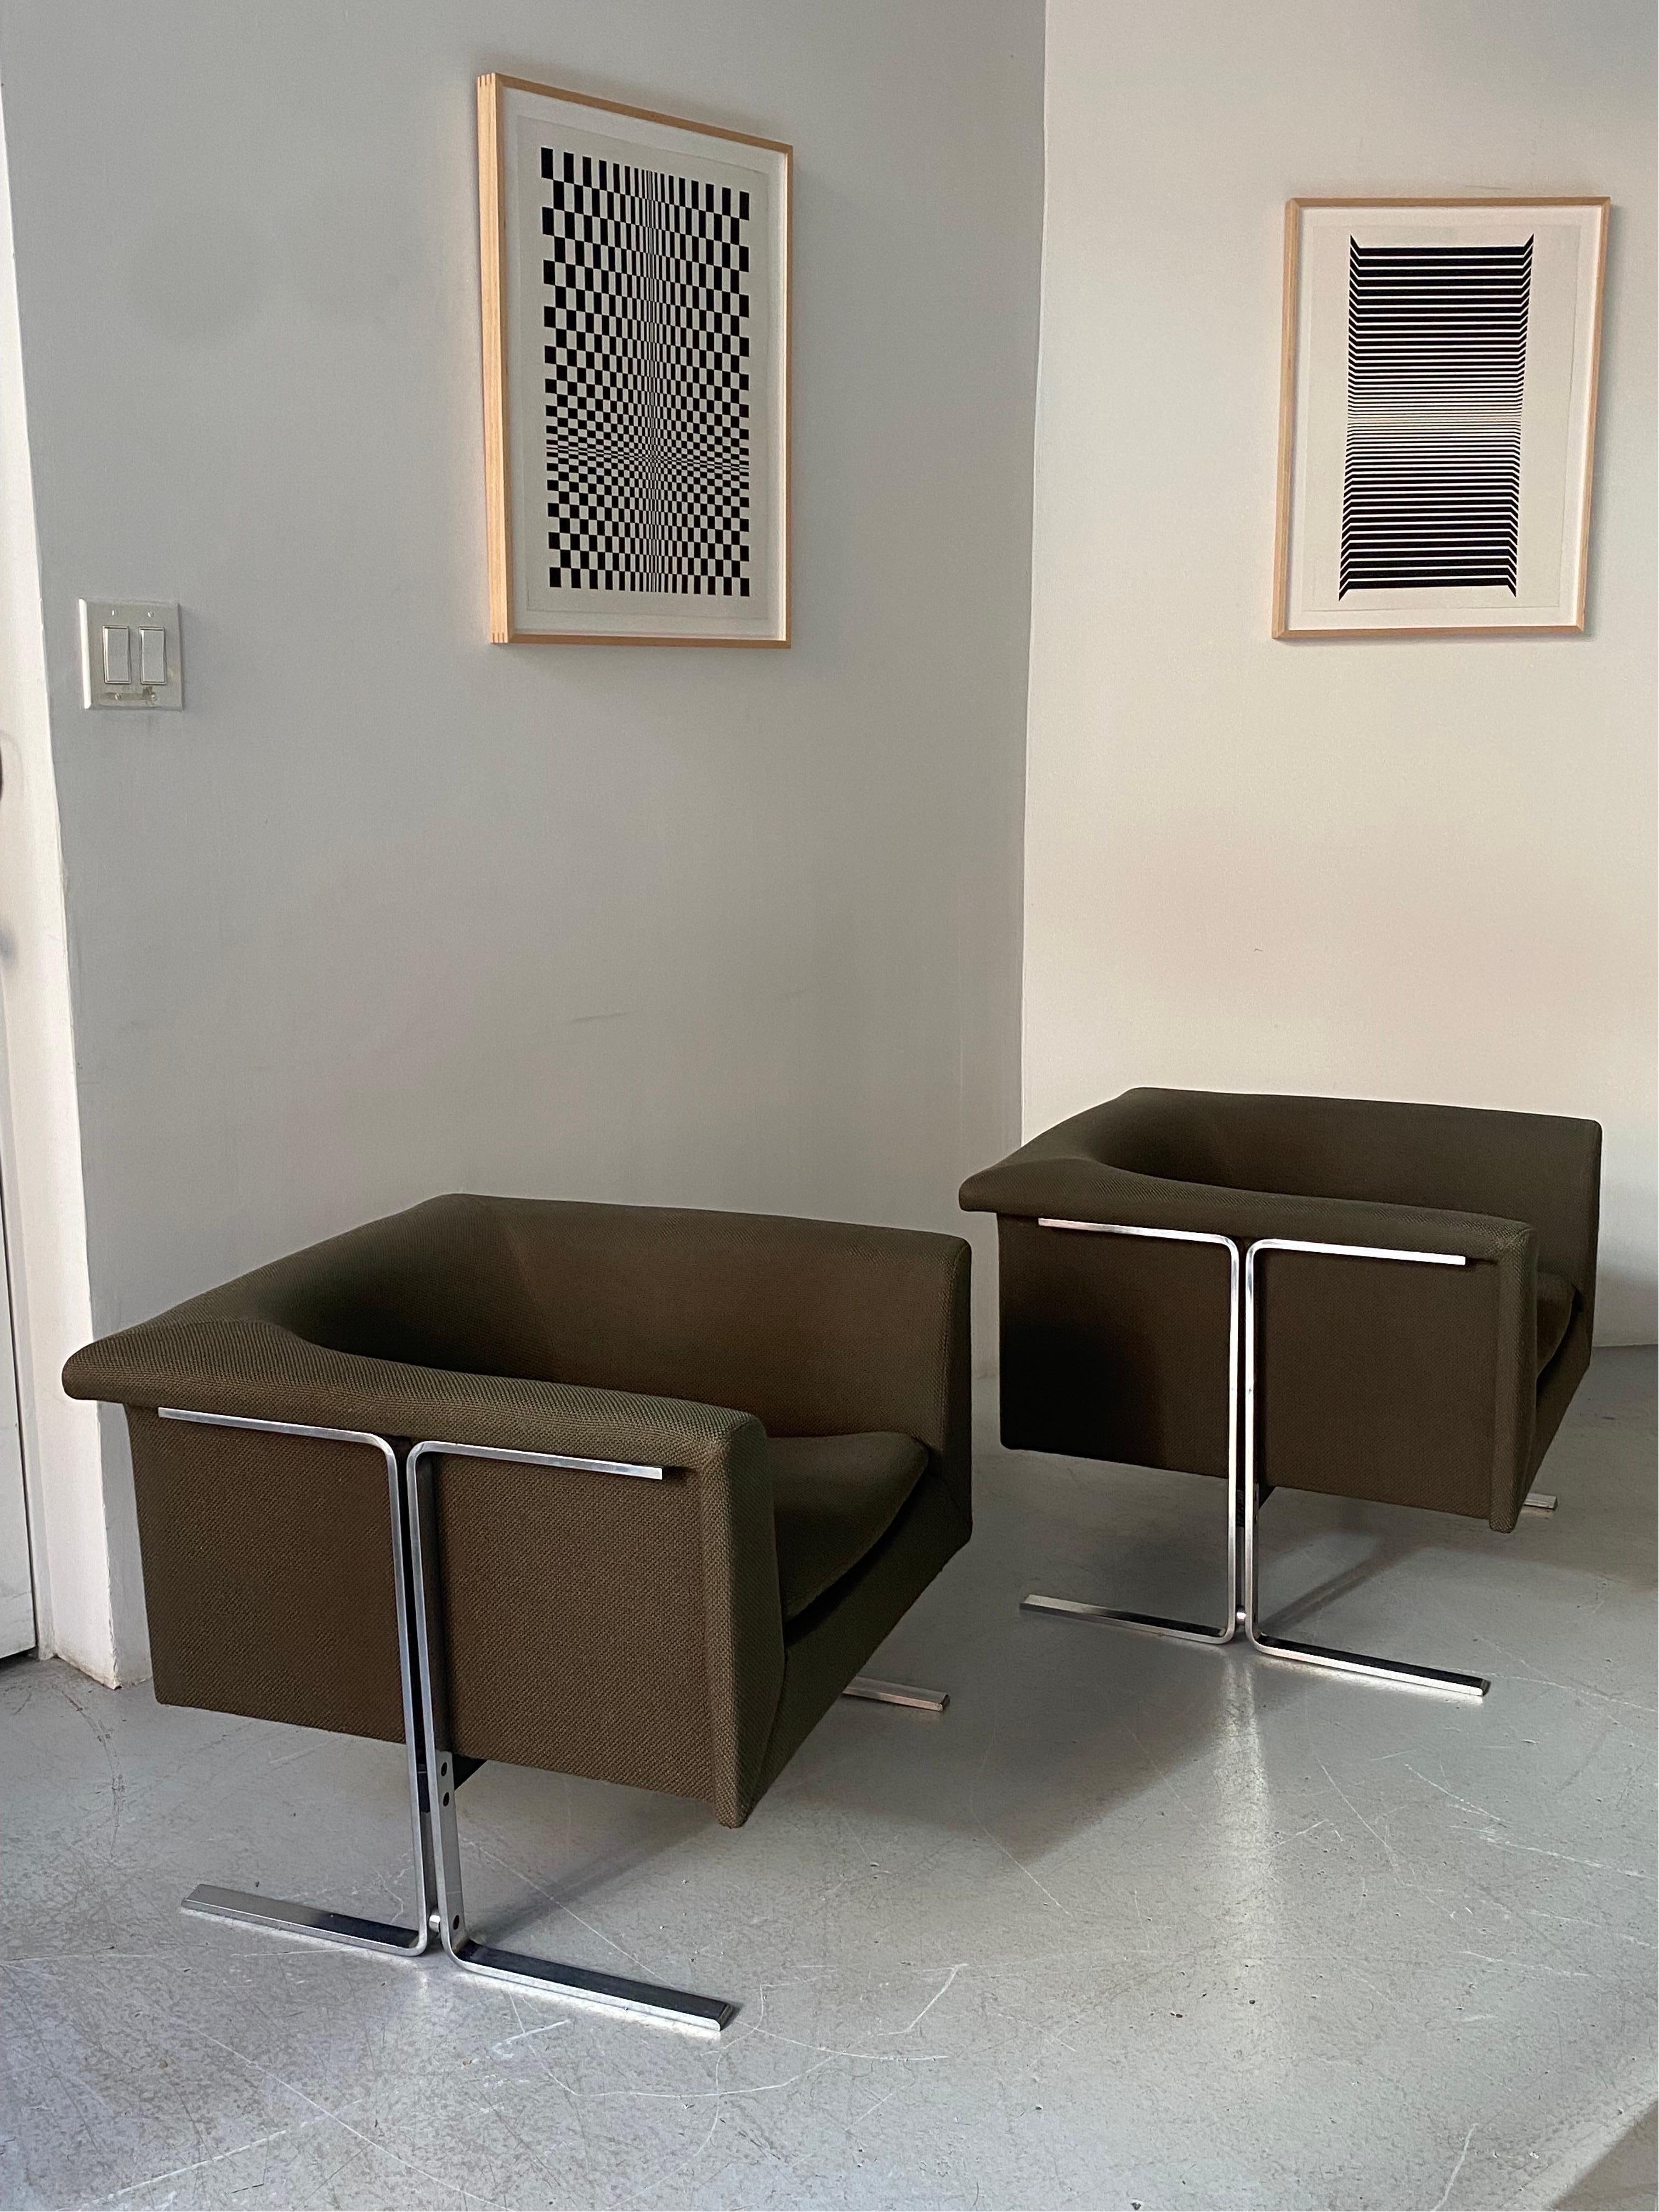 Great pair of Geoffrey Harcourt lounge chairs for Artifort, model 042.
Original olive green upholstery is in excellent condition, as are the steel frames. Both labeled underneath.
Great lines and comfort.
If you like to see the chairs in the